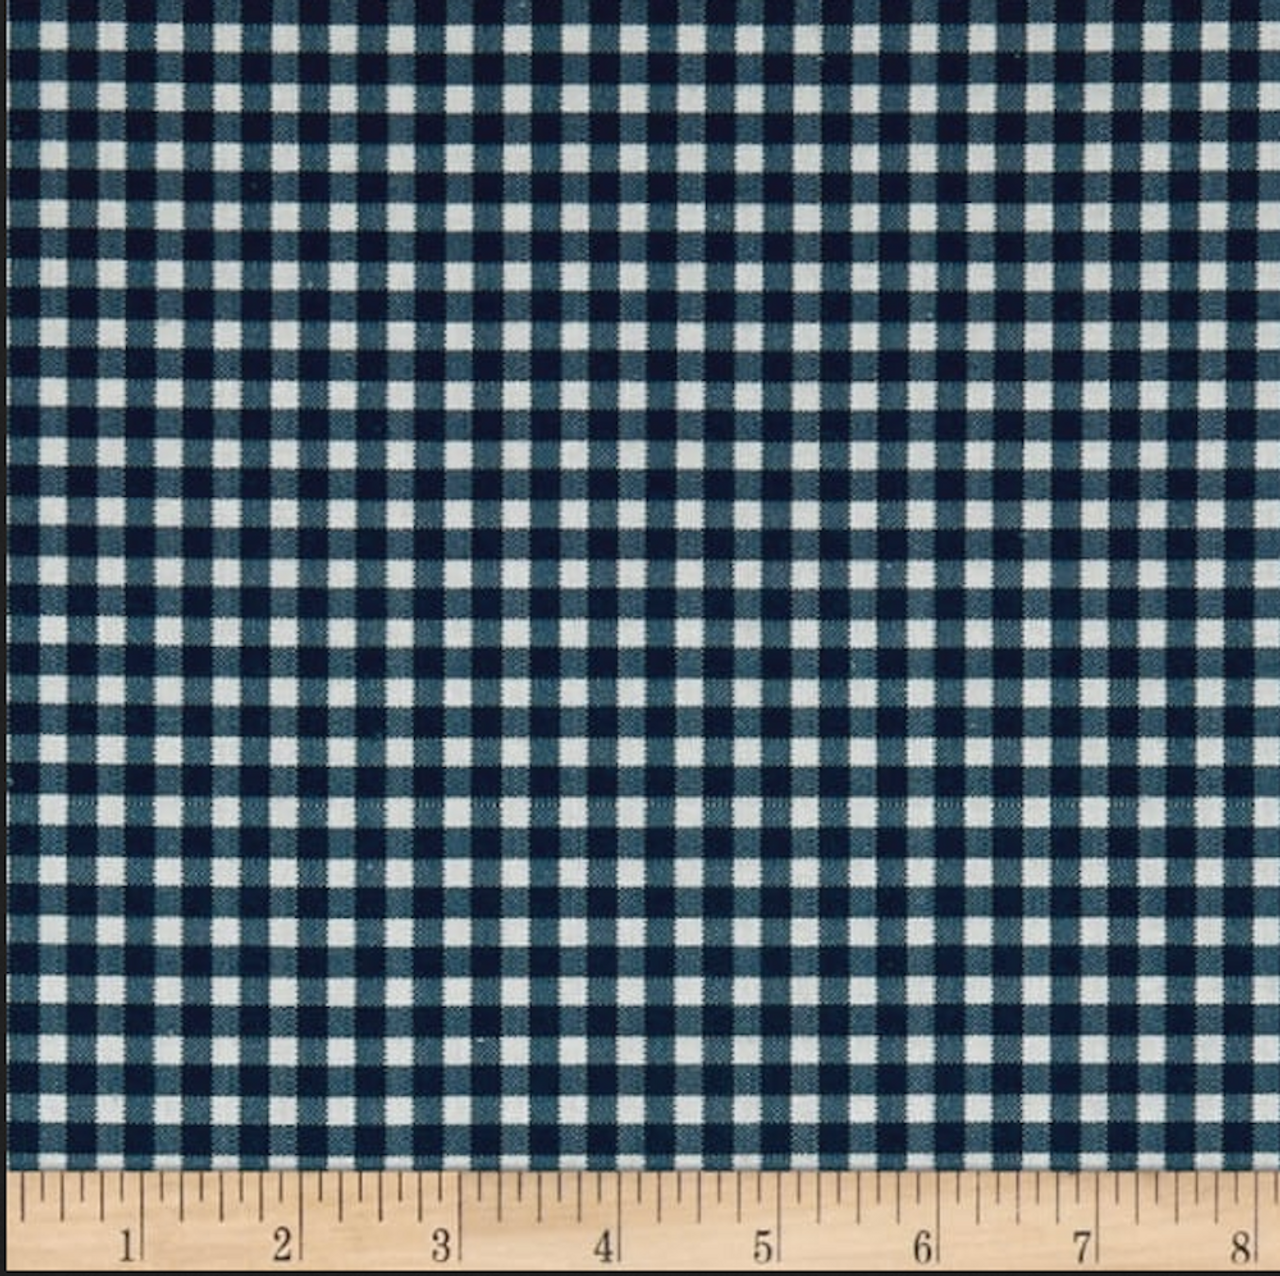 Stof of France Borde De Mer Check Blue Cotton Quilting Fabric By The Yard